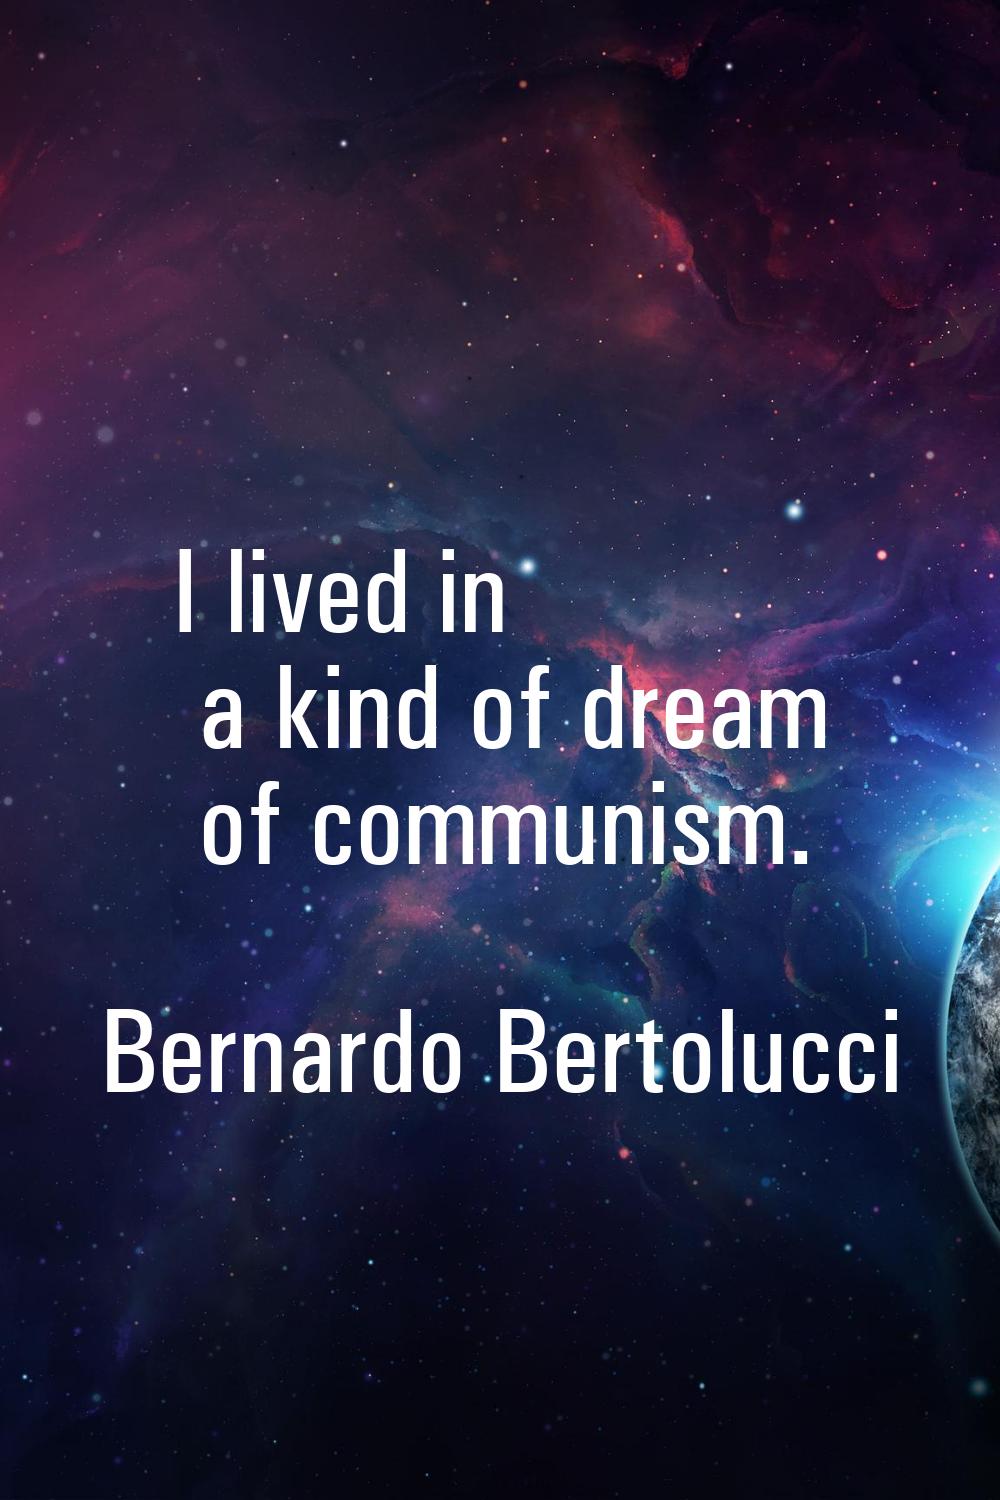 I lived in a kind of dream of communism.